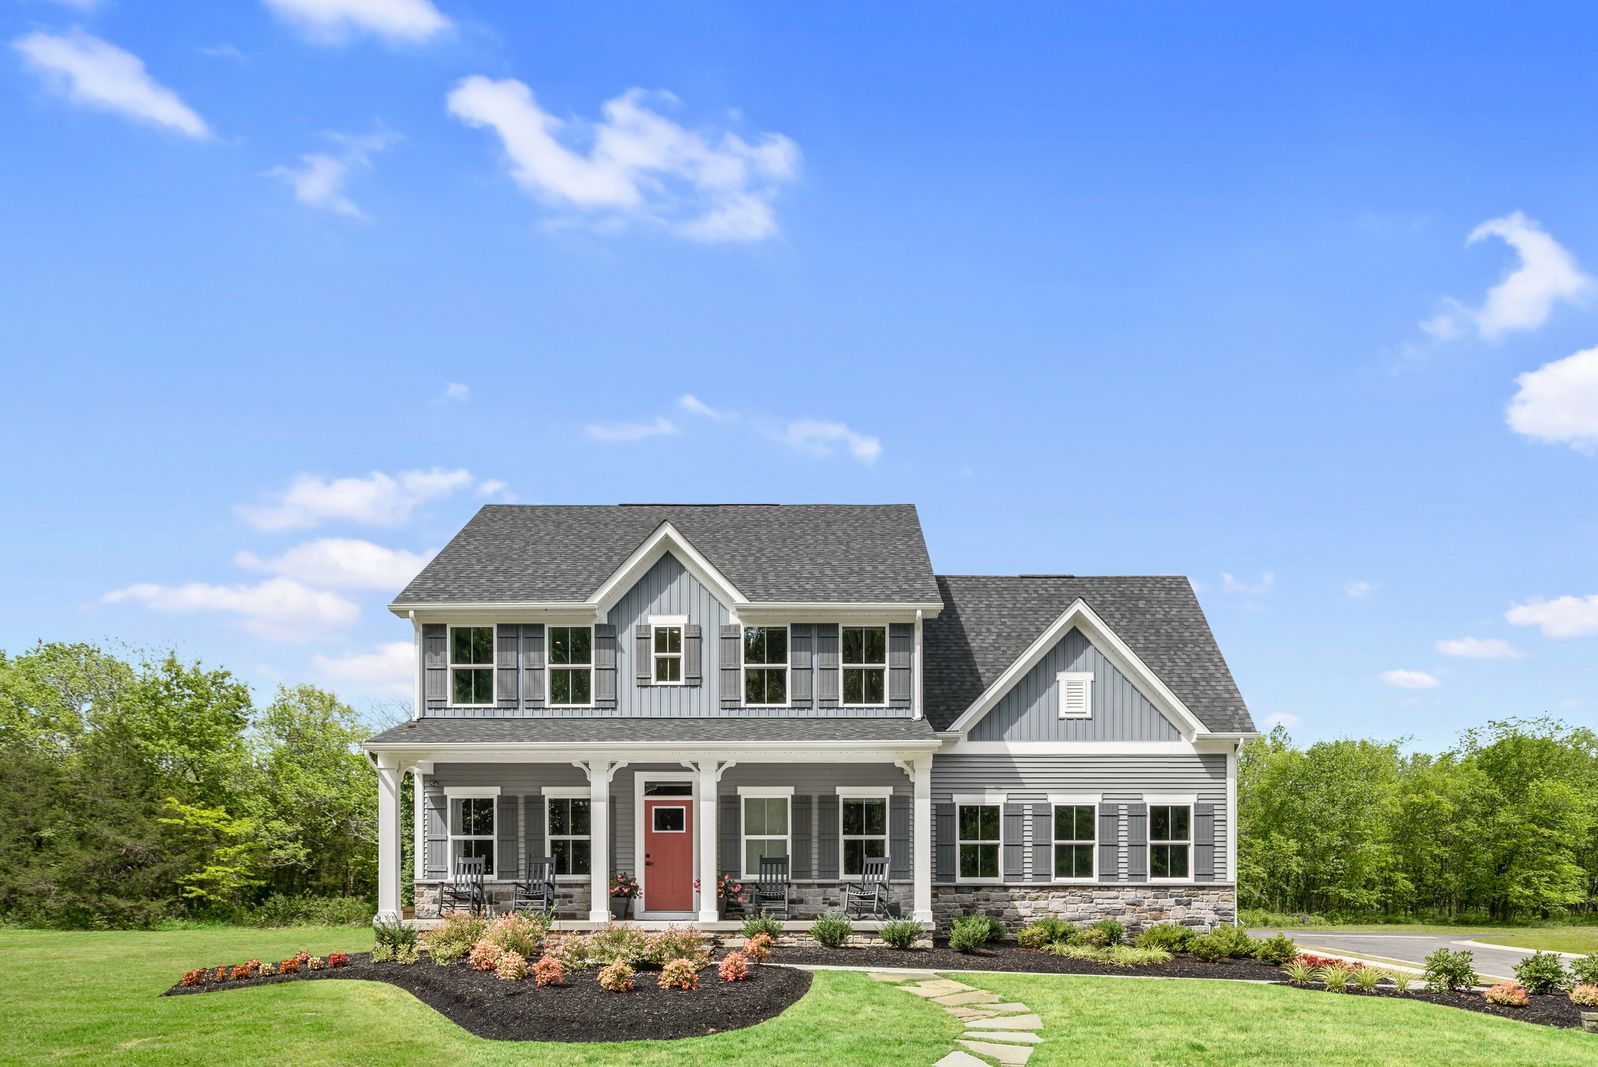 WELCOME TO GRANVILLE ESTATES, SINGLE-FAMILY HOMES on 1.5+ acre homesites FROM THE UPPER $500S!